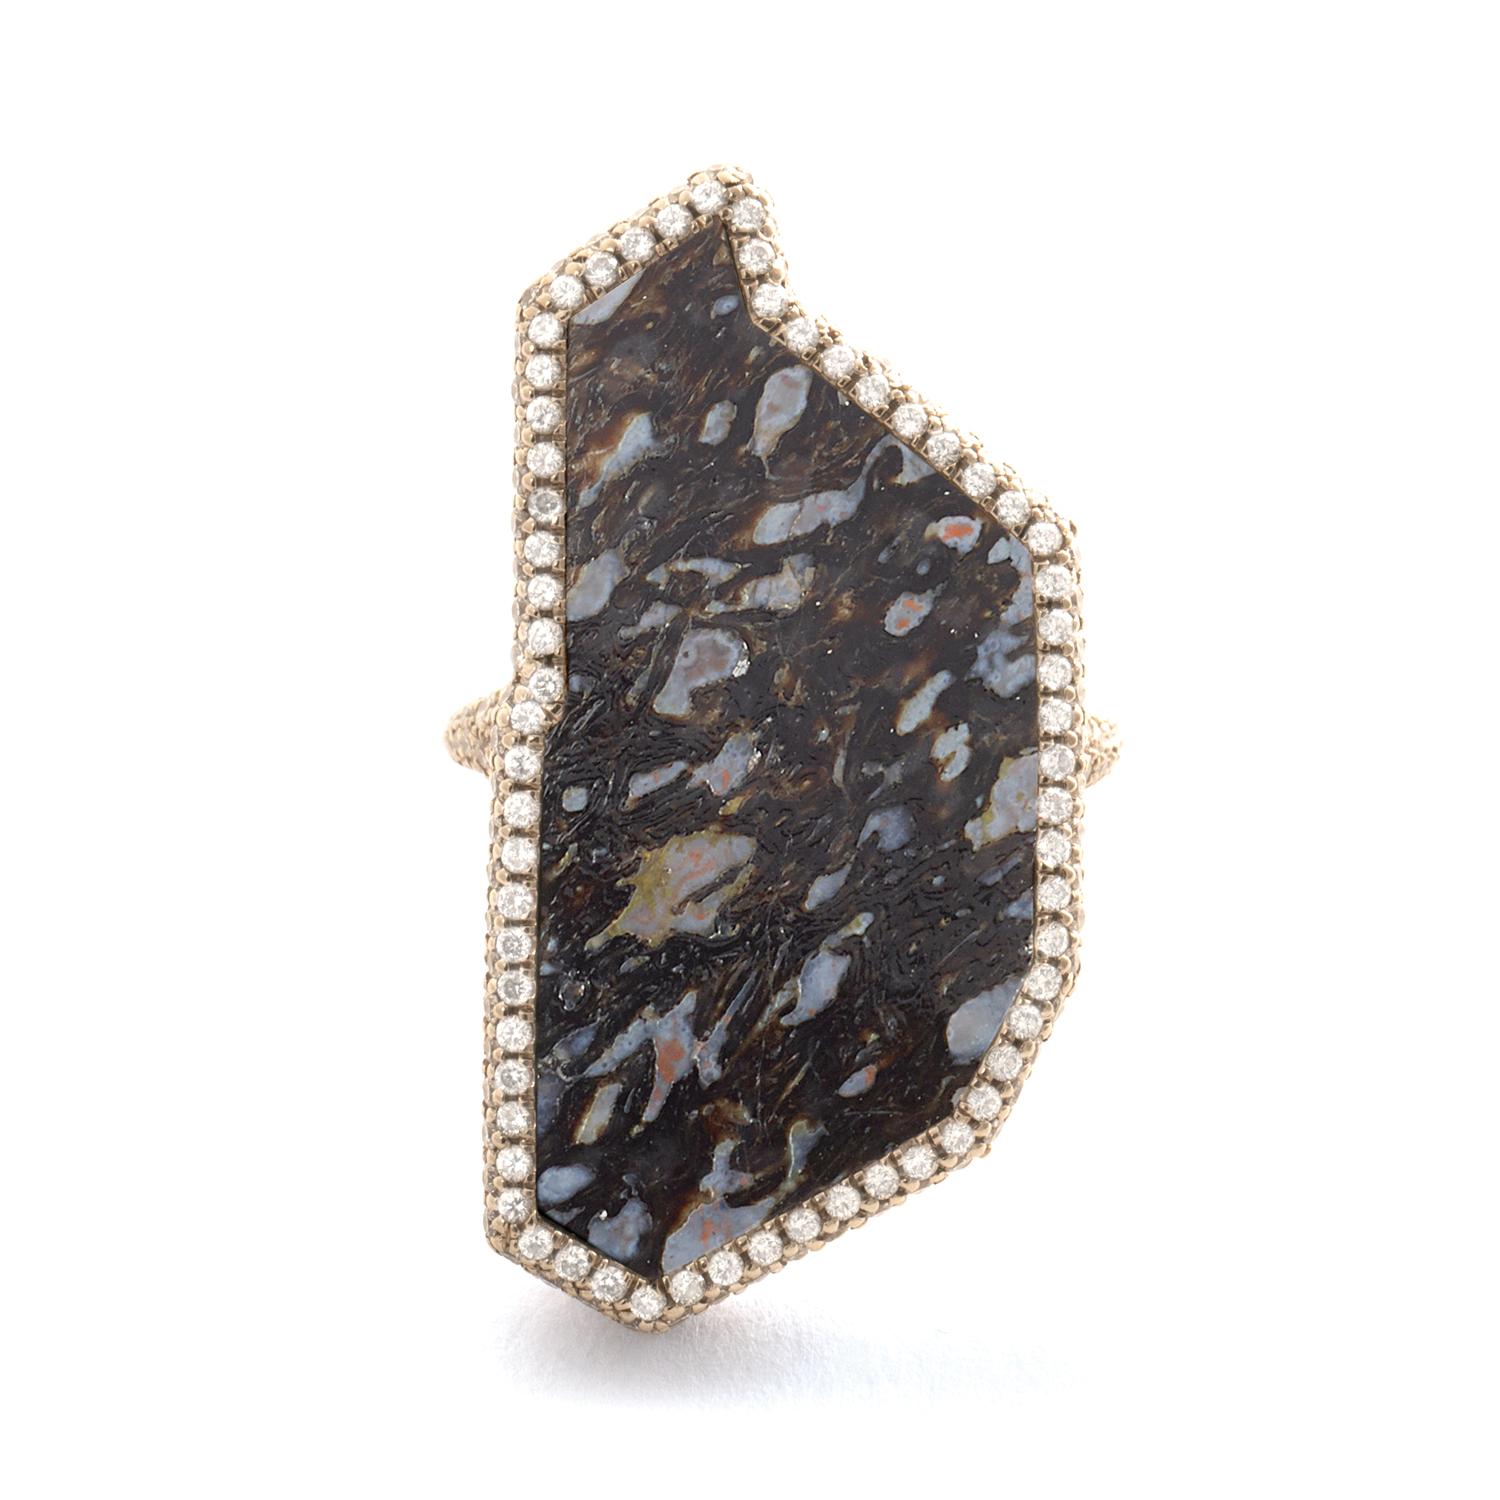 Flawless black fossilized dinosaur bone and white diamond ring, 18 carat recycled white gold, 2.89 TCW  - One-of-a-kind

The immersive black and blue hues of this specimen of fossilized dinosaur bone are accented by pavé-set white diamonds that